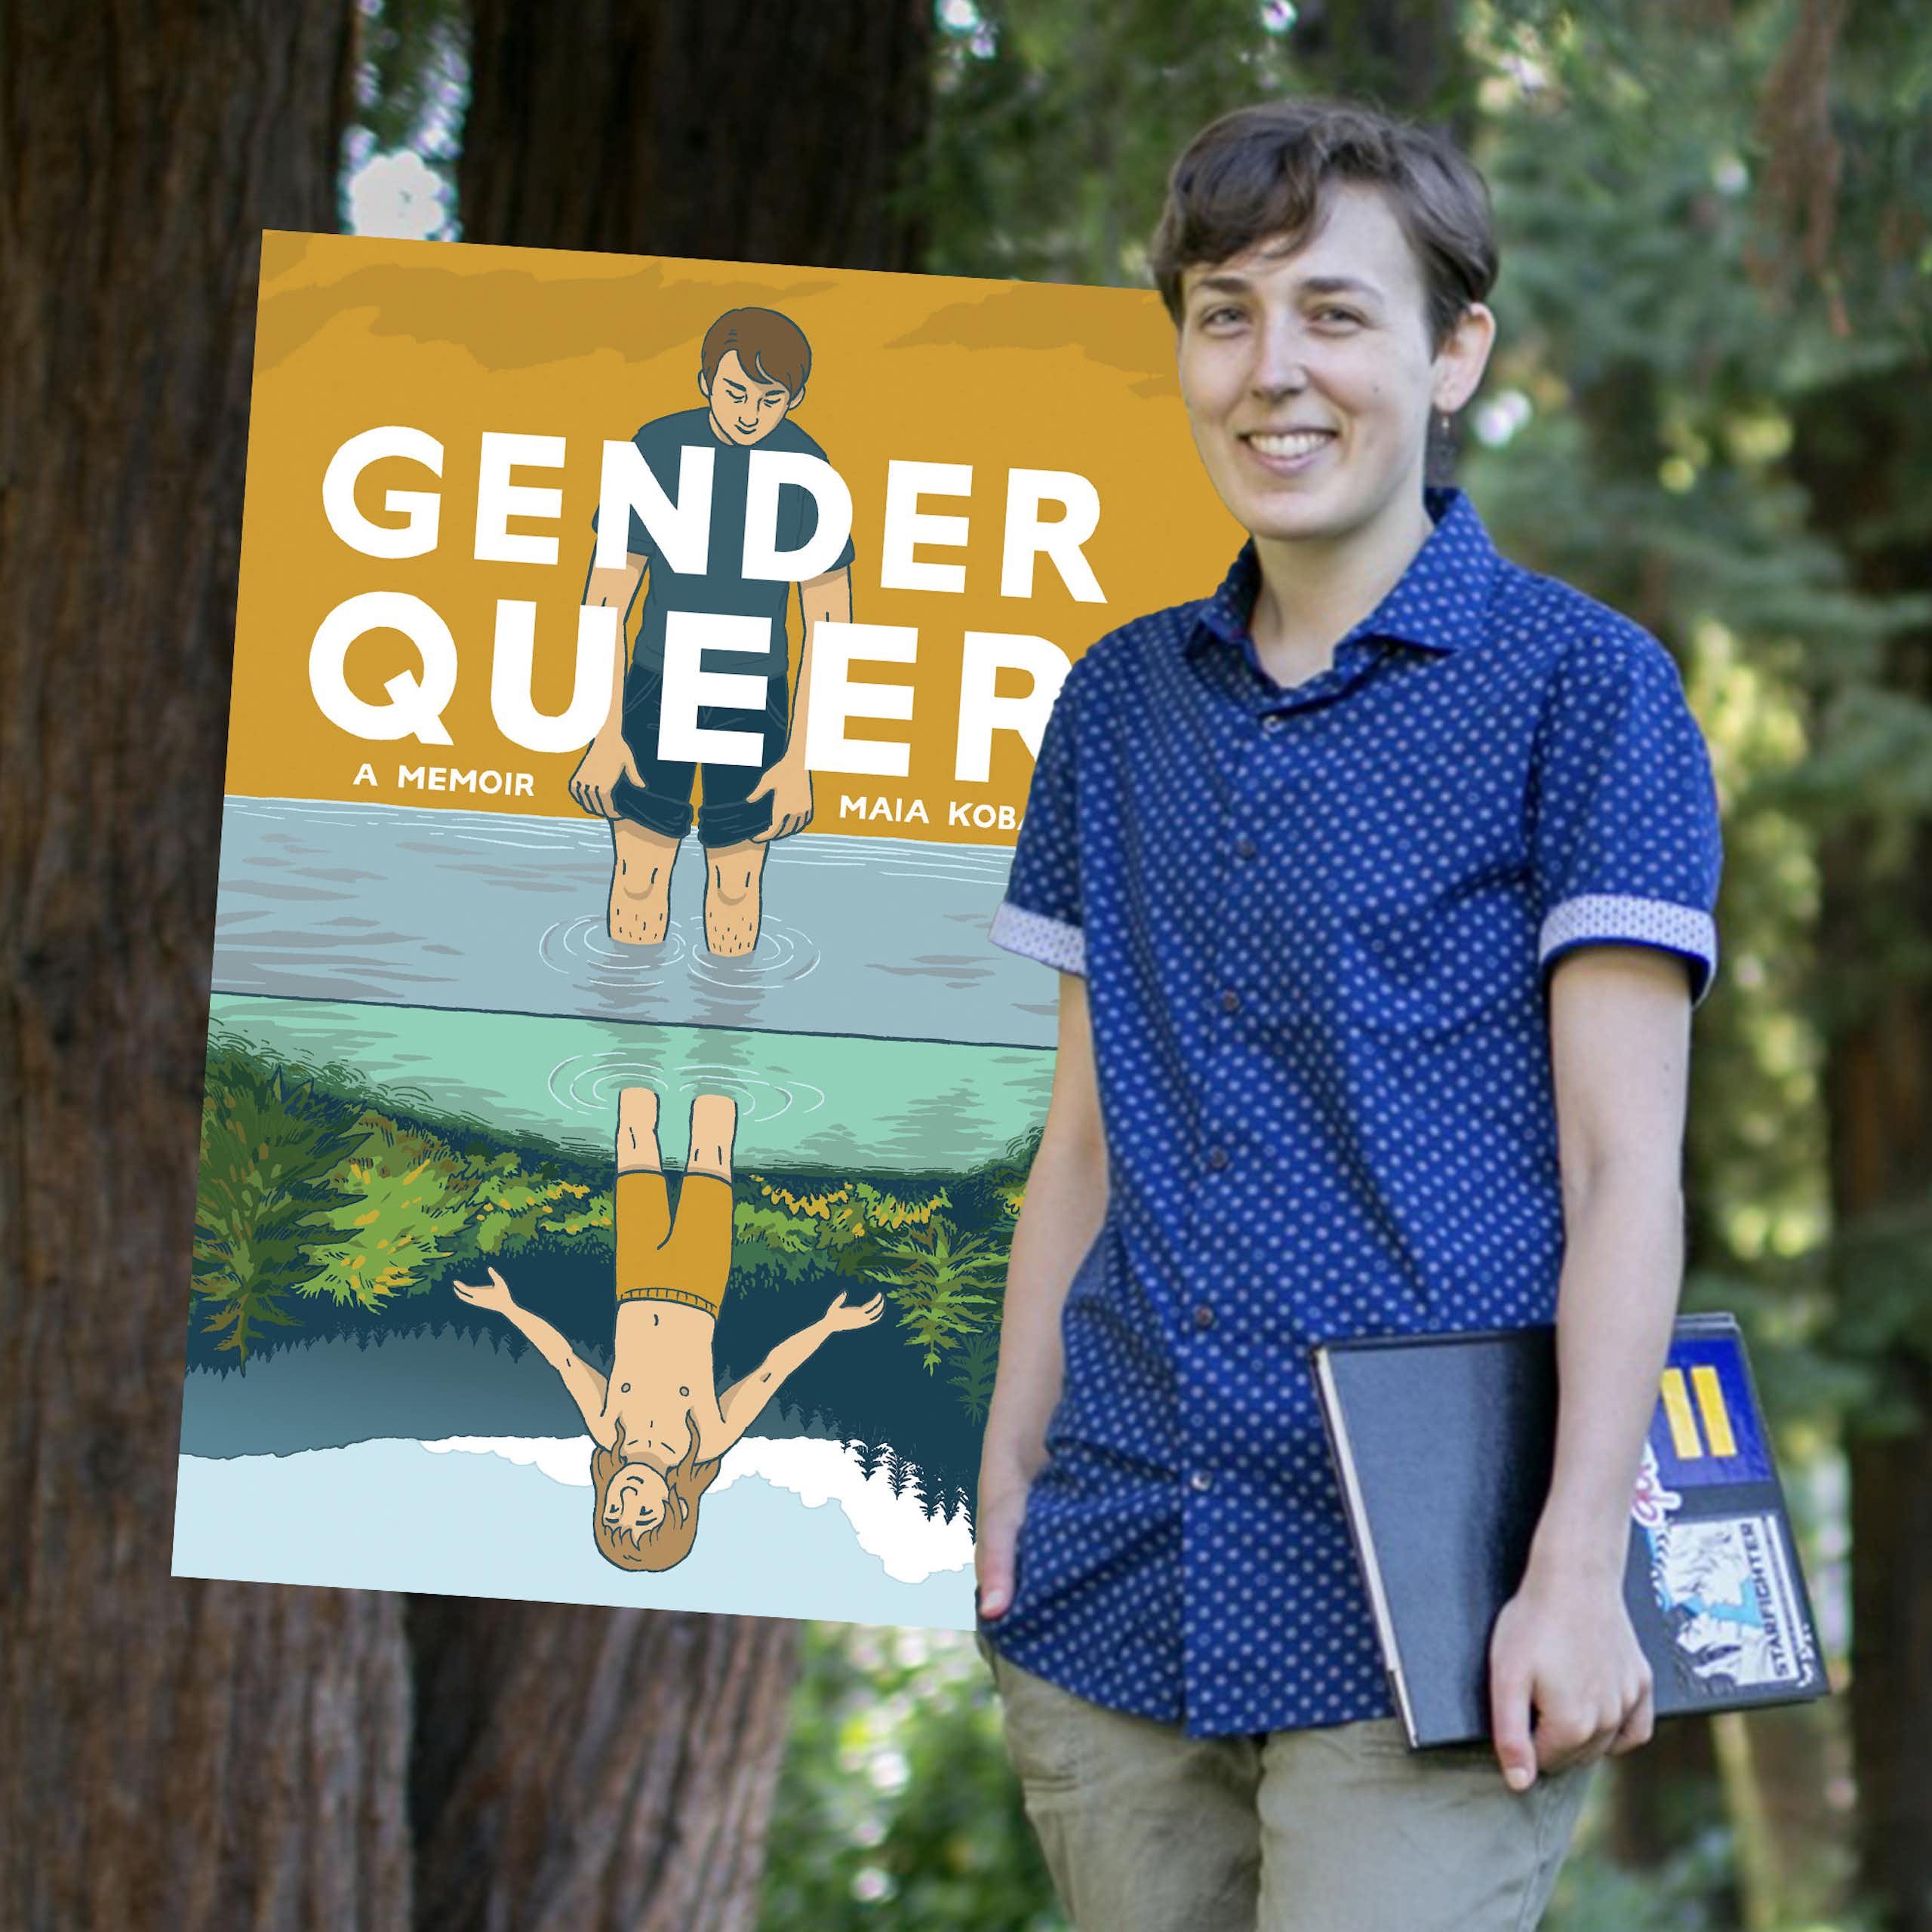 Gender Queer was the last book an Australian council tried to ban. It’s still being appealed in federal court